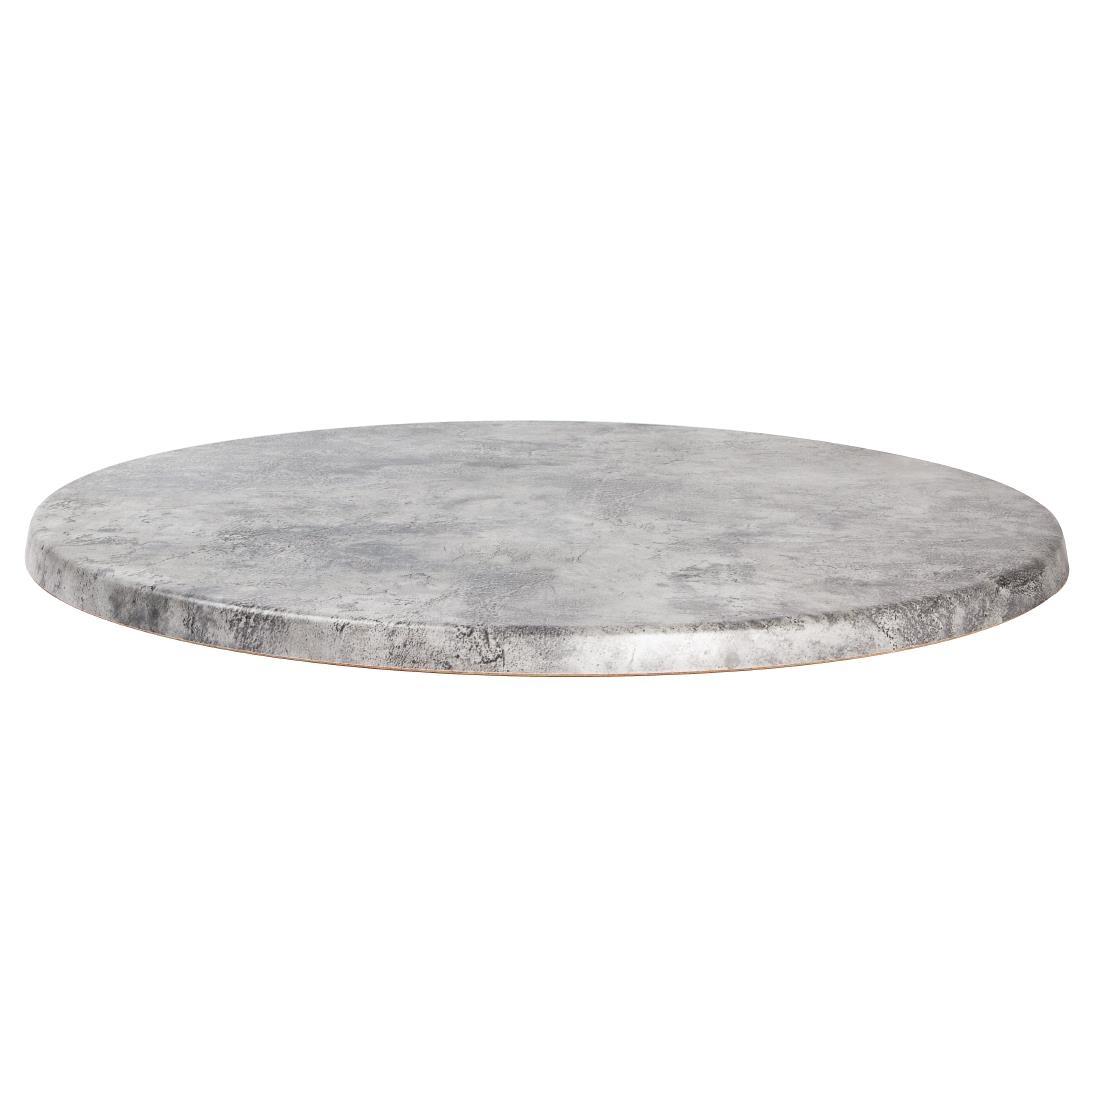 Werzalit Pre-Drilled Round Table Top Concrete 800mm - GM421  - 2